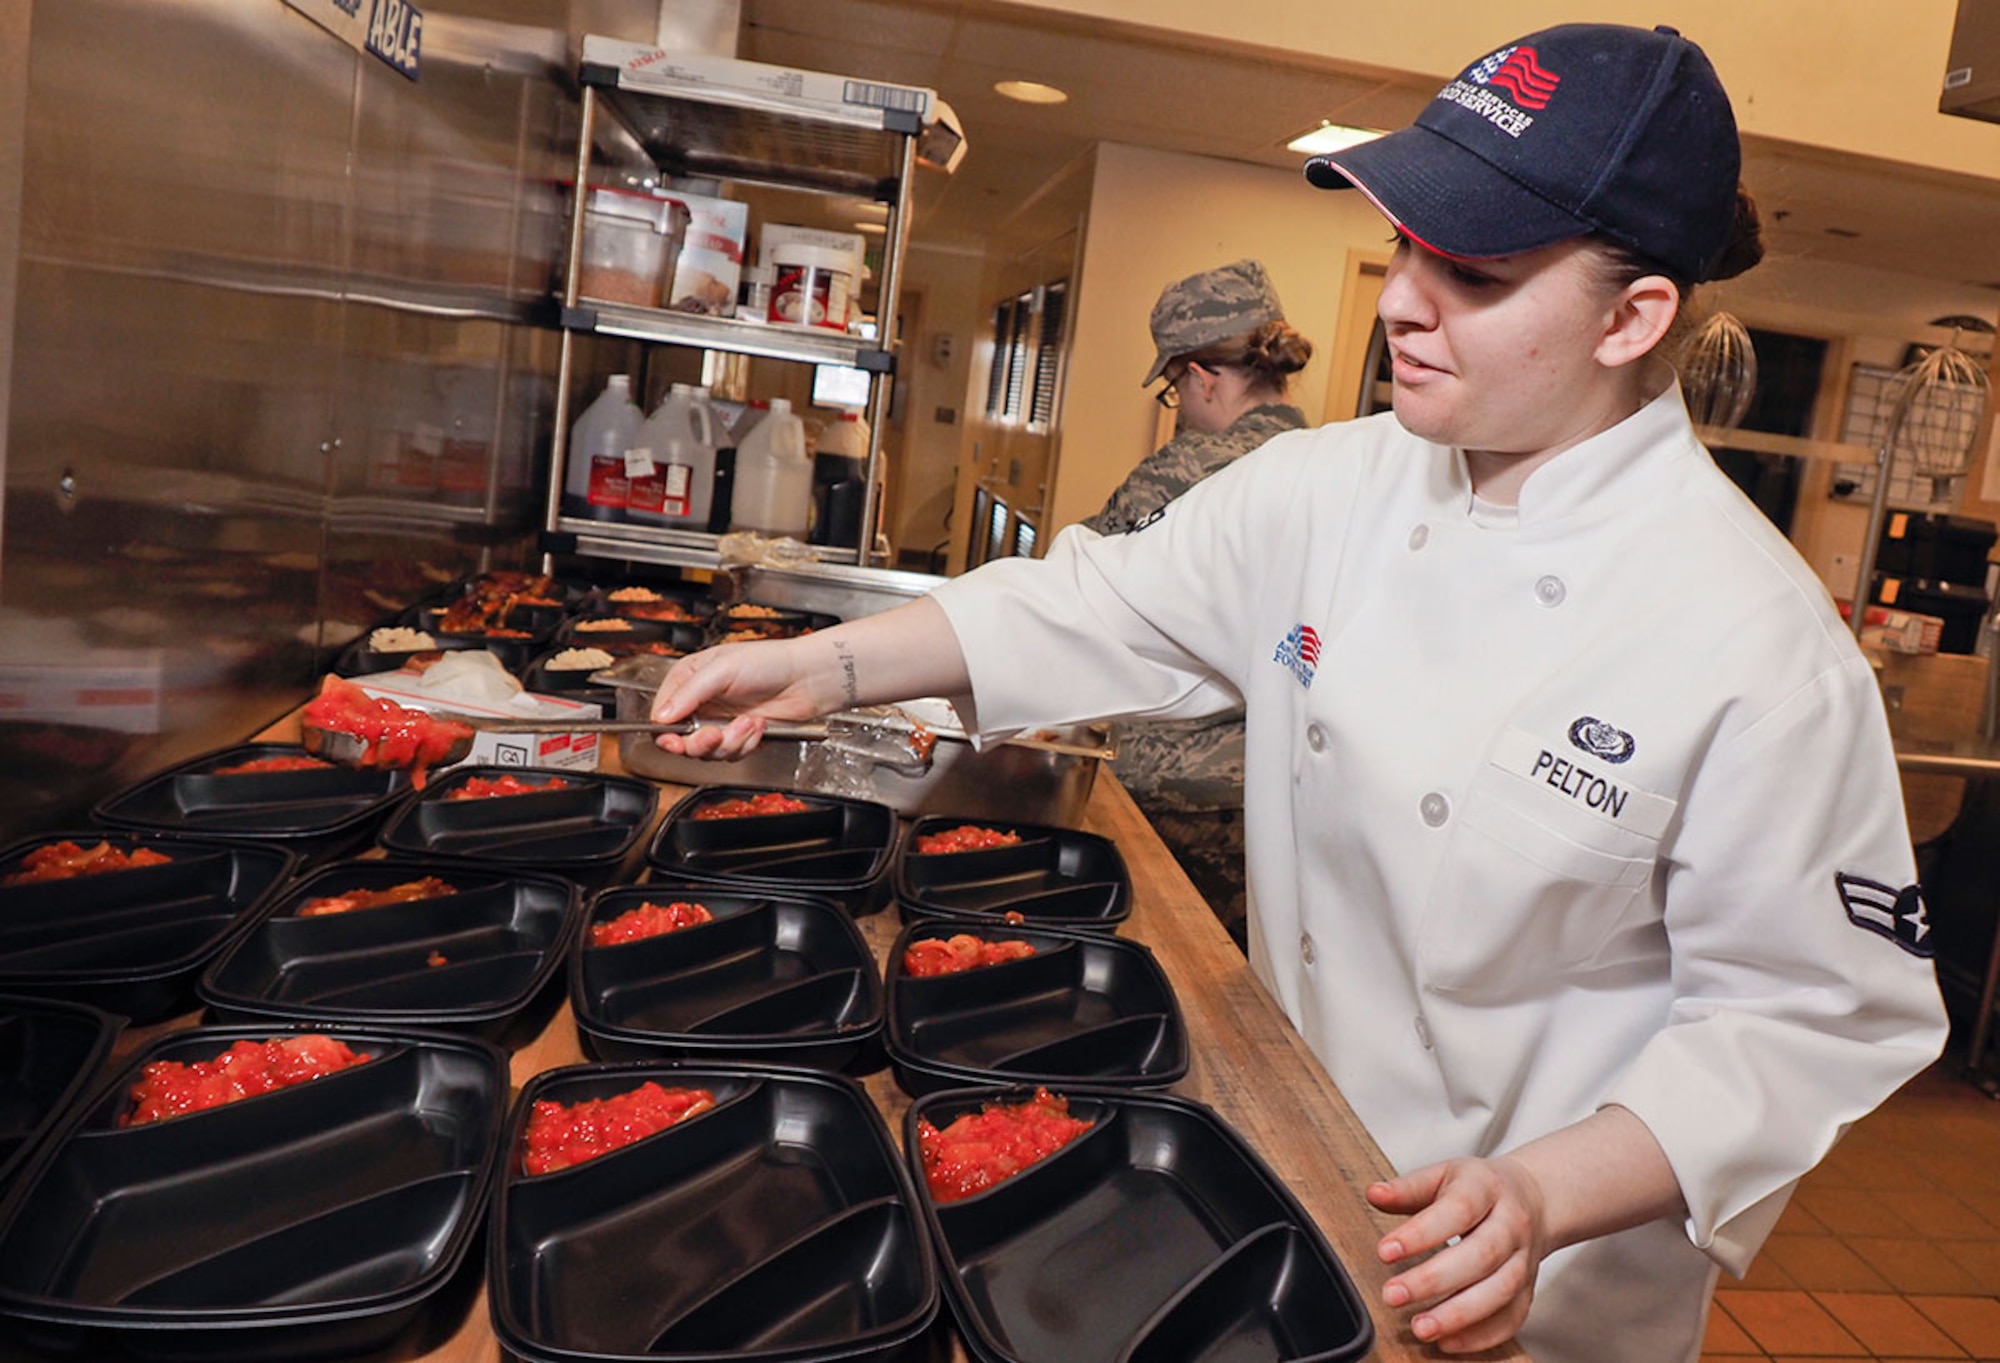 Airman 1st Class Cortny Pelton, assigned to 673rd Force Support Squadron, prepares food for lunch at the Iditarod Dining Facility April 23, 2015, on Joint Base Elmendorf-Richardson, Alaska. Pelton, a native of Wyoming, Mich., and the rest of the 673rd FSS, earned the Air Force Curtis E. LeMay award for best large installation-level FSS of the year in the Air Force for 2014. (U.S. Air Force photo/Justin Connaher)